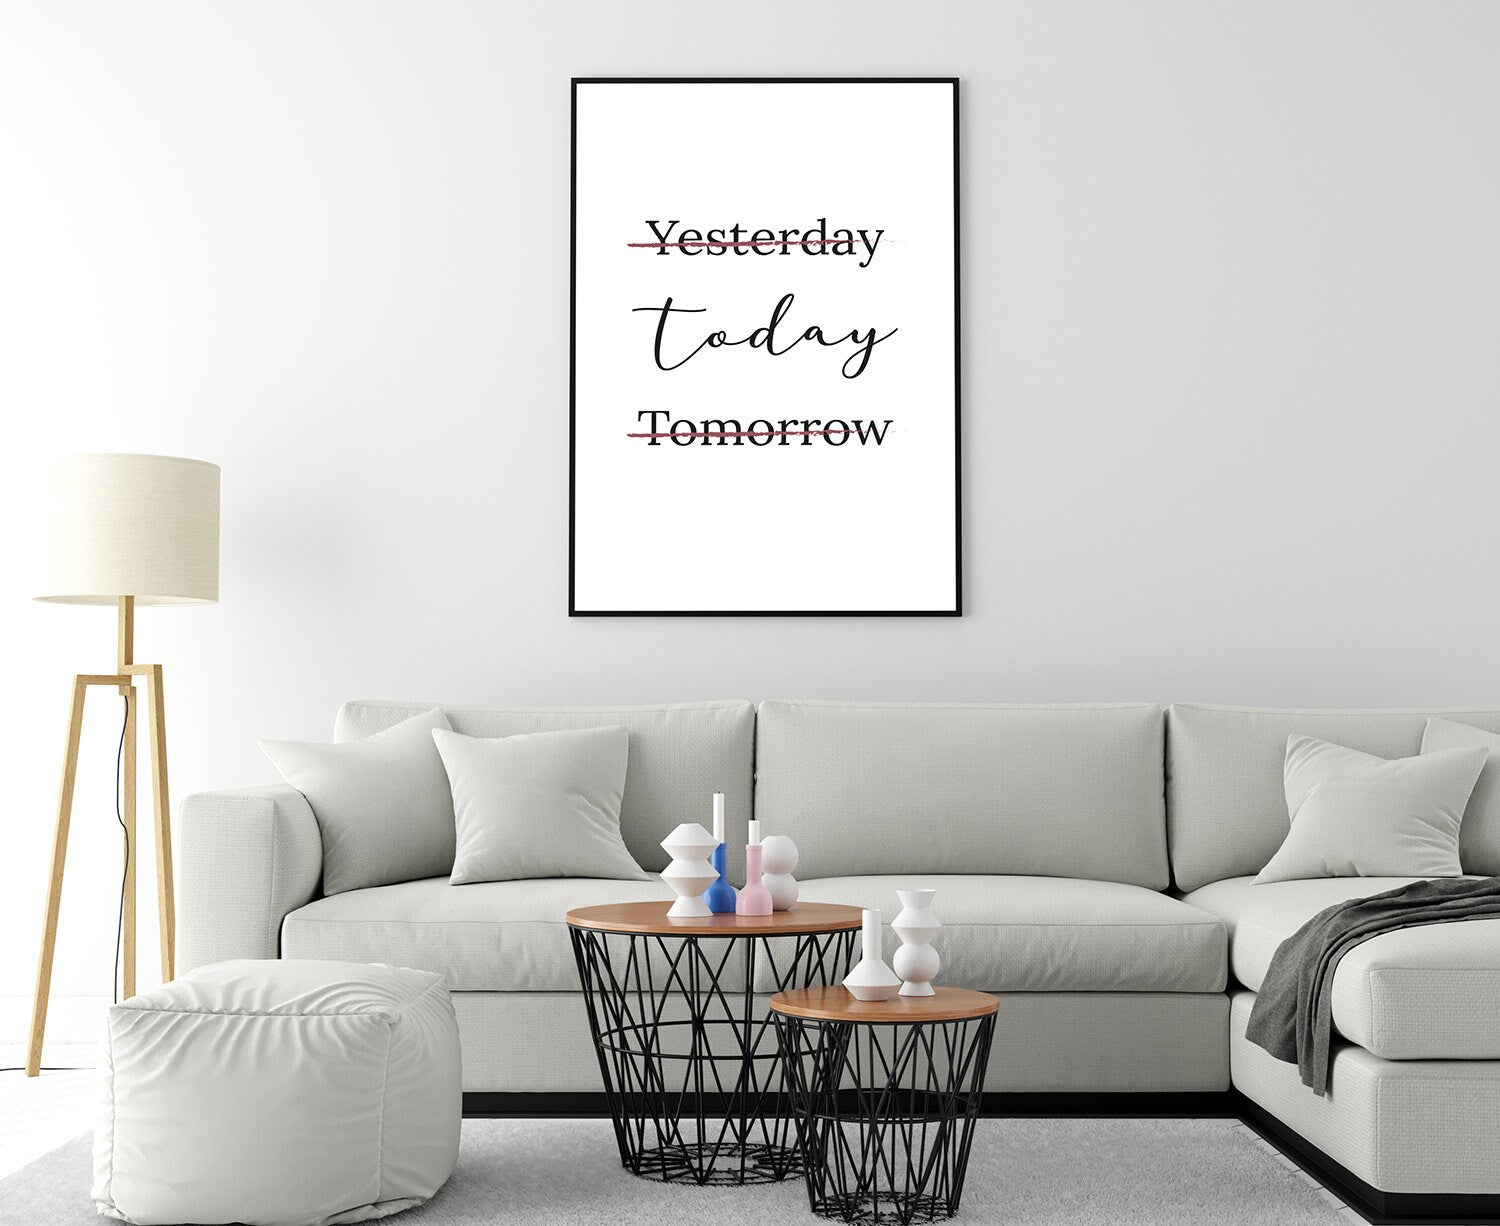 Yesterday Today Tomorrow, Office wall decoration, Kids room wall art, Meaningful word quotes, Motivational posters, Inspirational poster